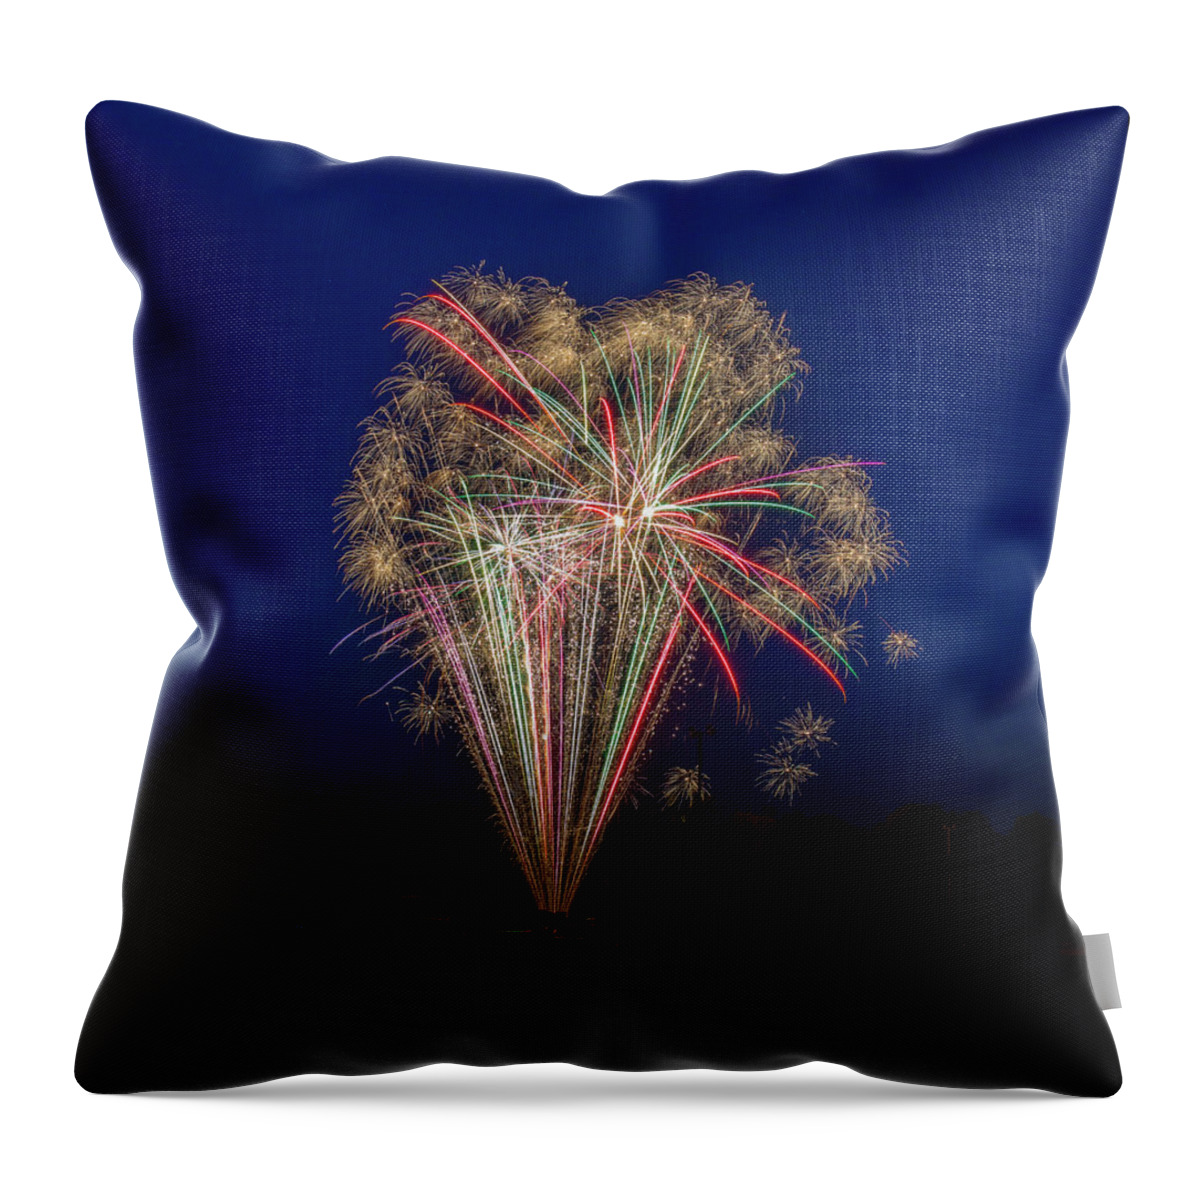 Fireworks Throw Pillow featuring the photograph Bombs Bursting In Air II by Harry B Brown